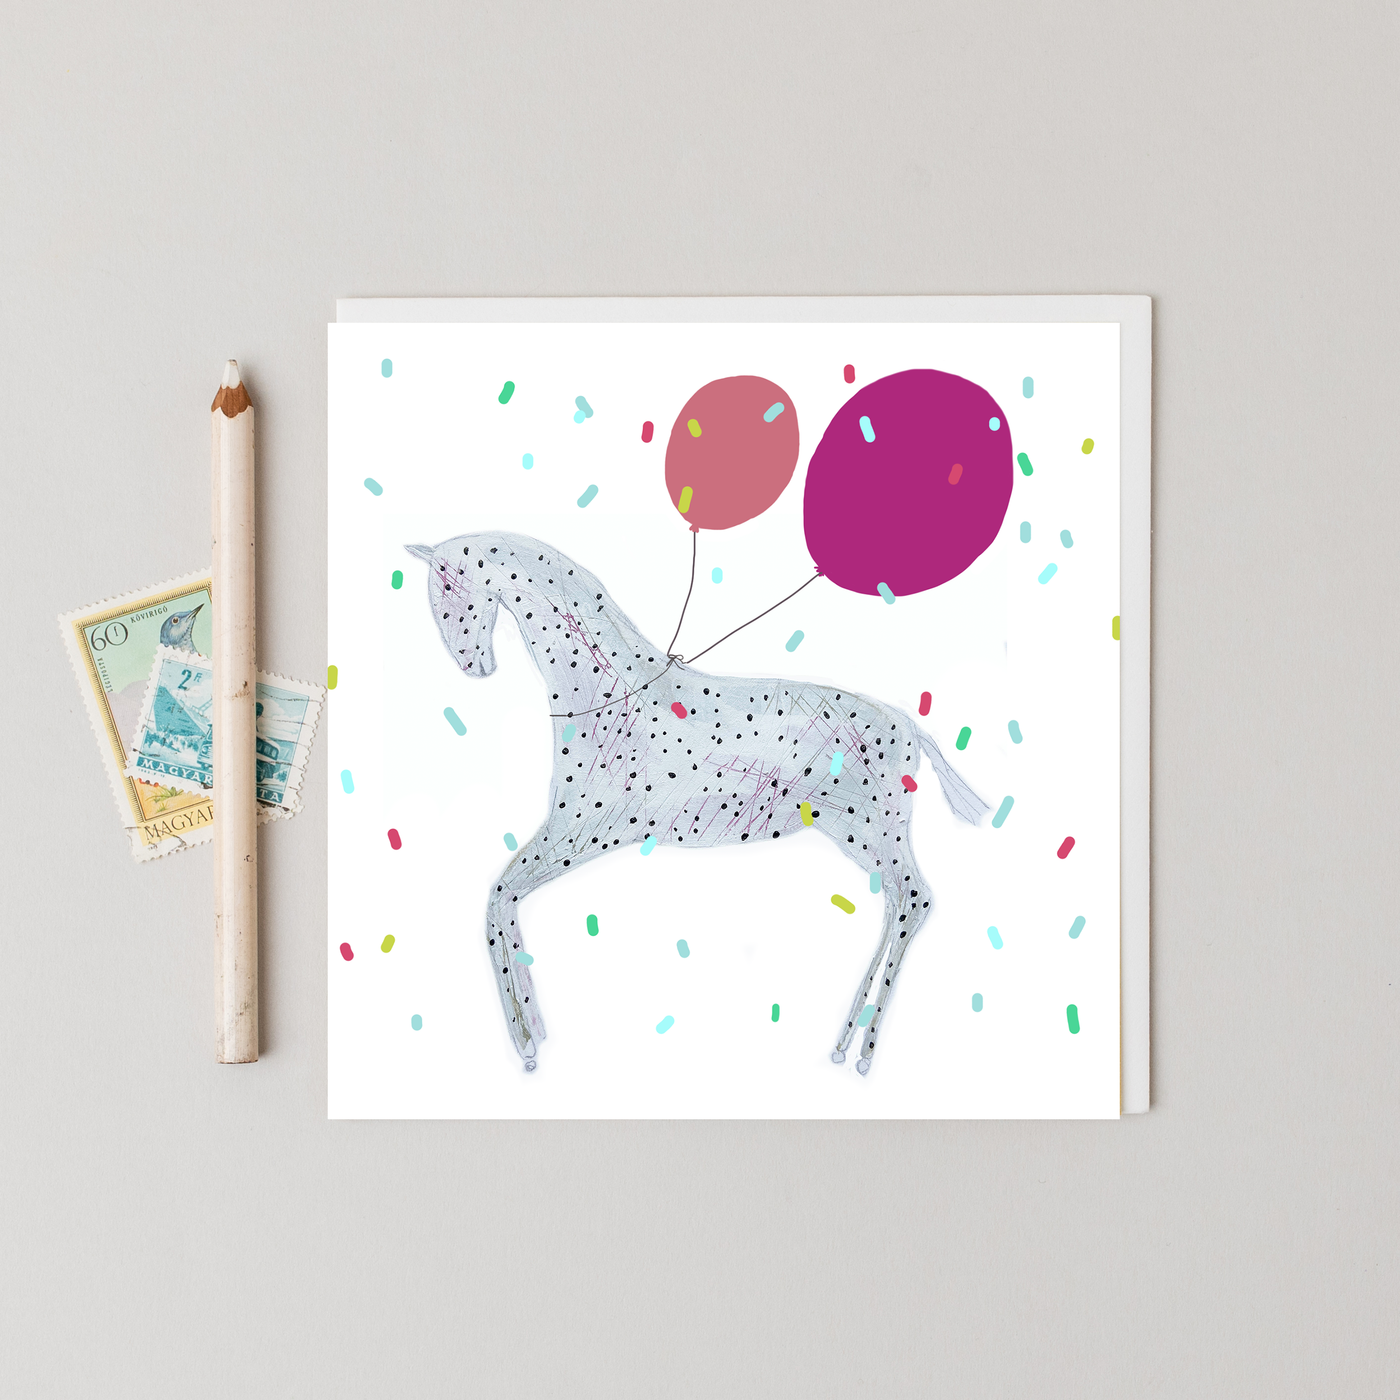 Pony with Balloons greetings card